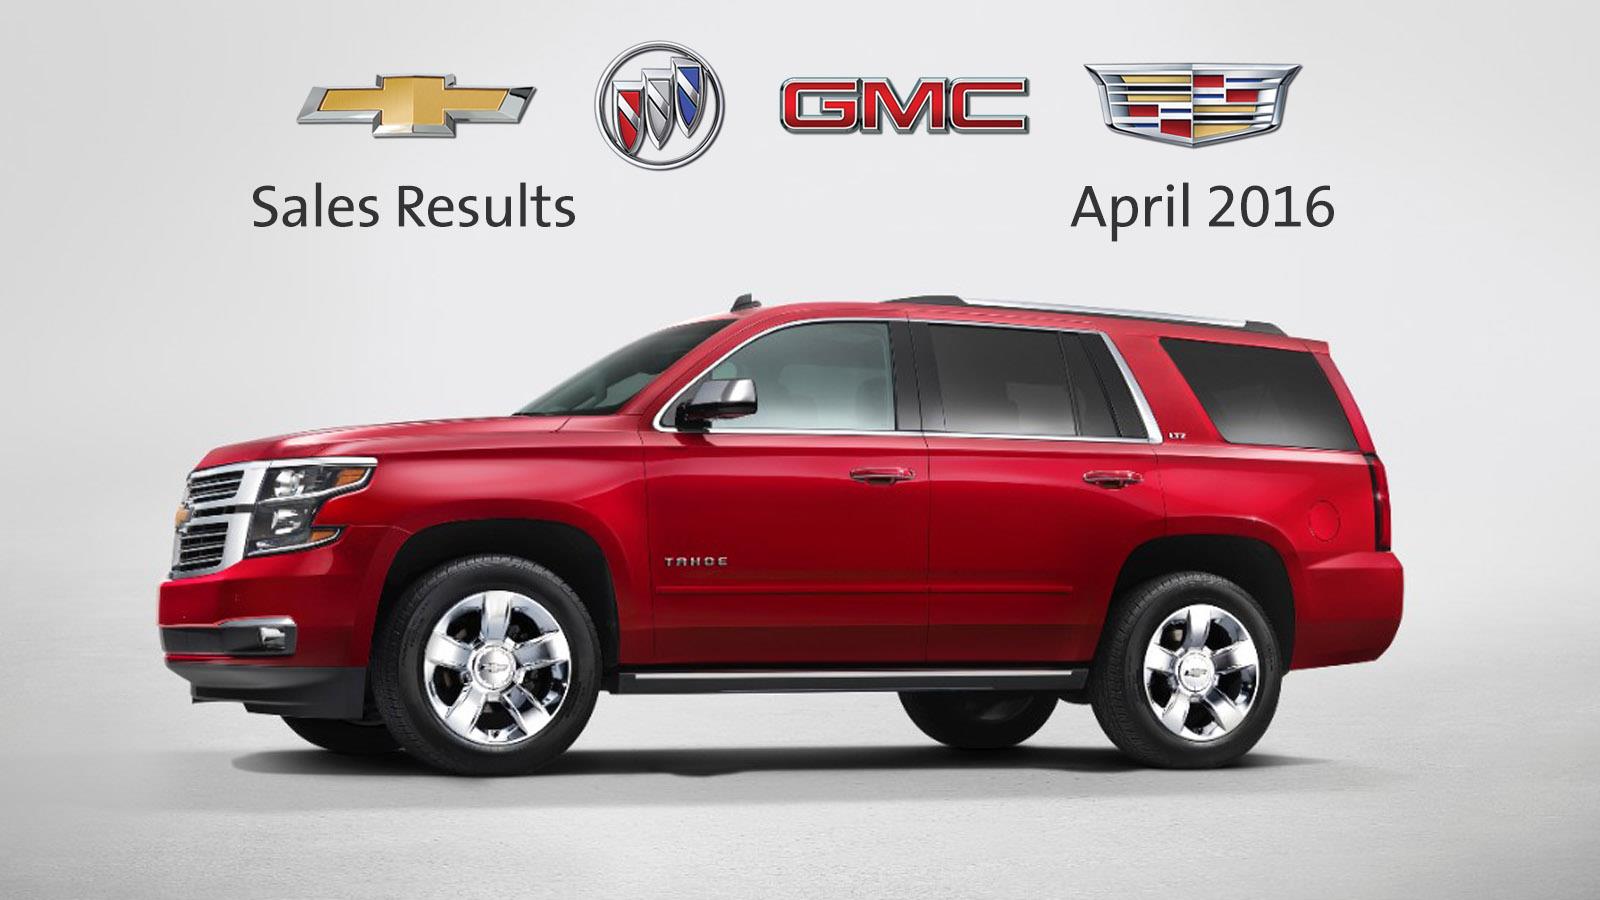 GM's Retail Sales Rise for 12th Consecutive Month Driven by Chevrolet, Buick and GMC